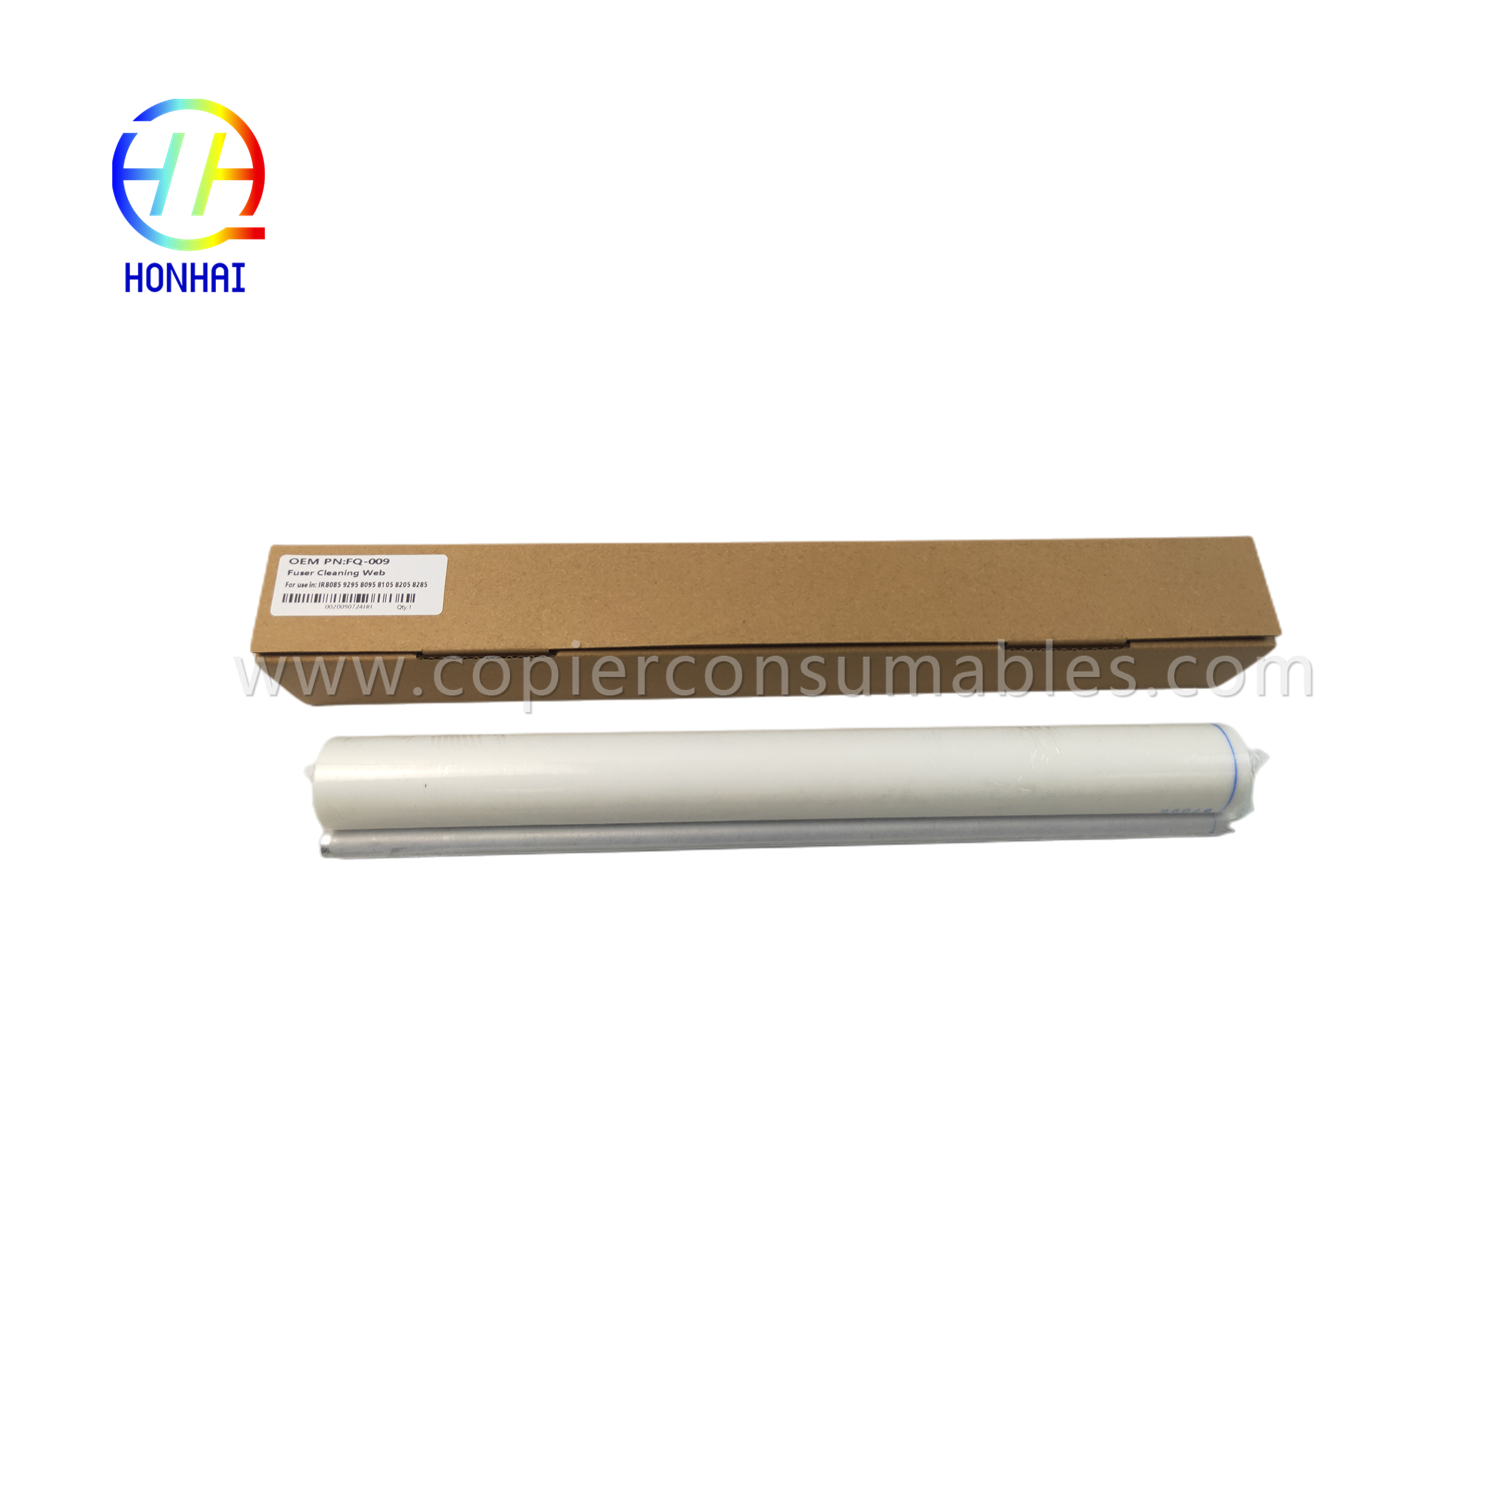 https://c585.goodao.net/fuser-cleaning-web-for-canon-ir6800-ir-8085-8095-8105-8205-8285-8295-fq-009-fc5-2286-000-oem-fuser- cleaning-fuser-roller-product/